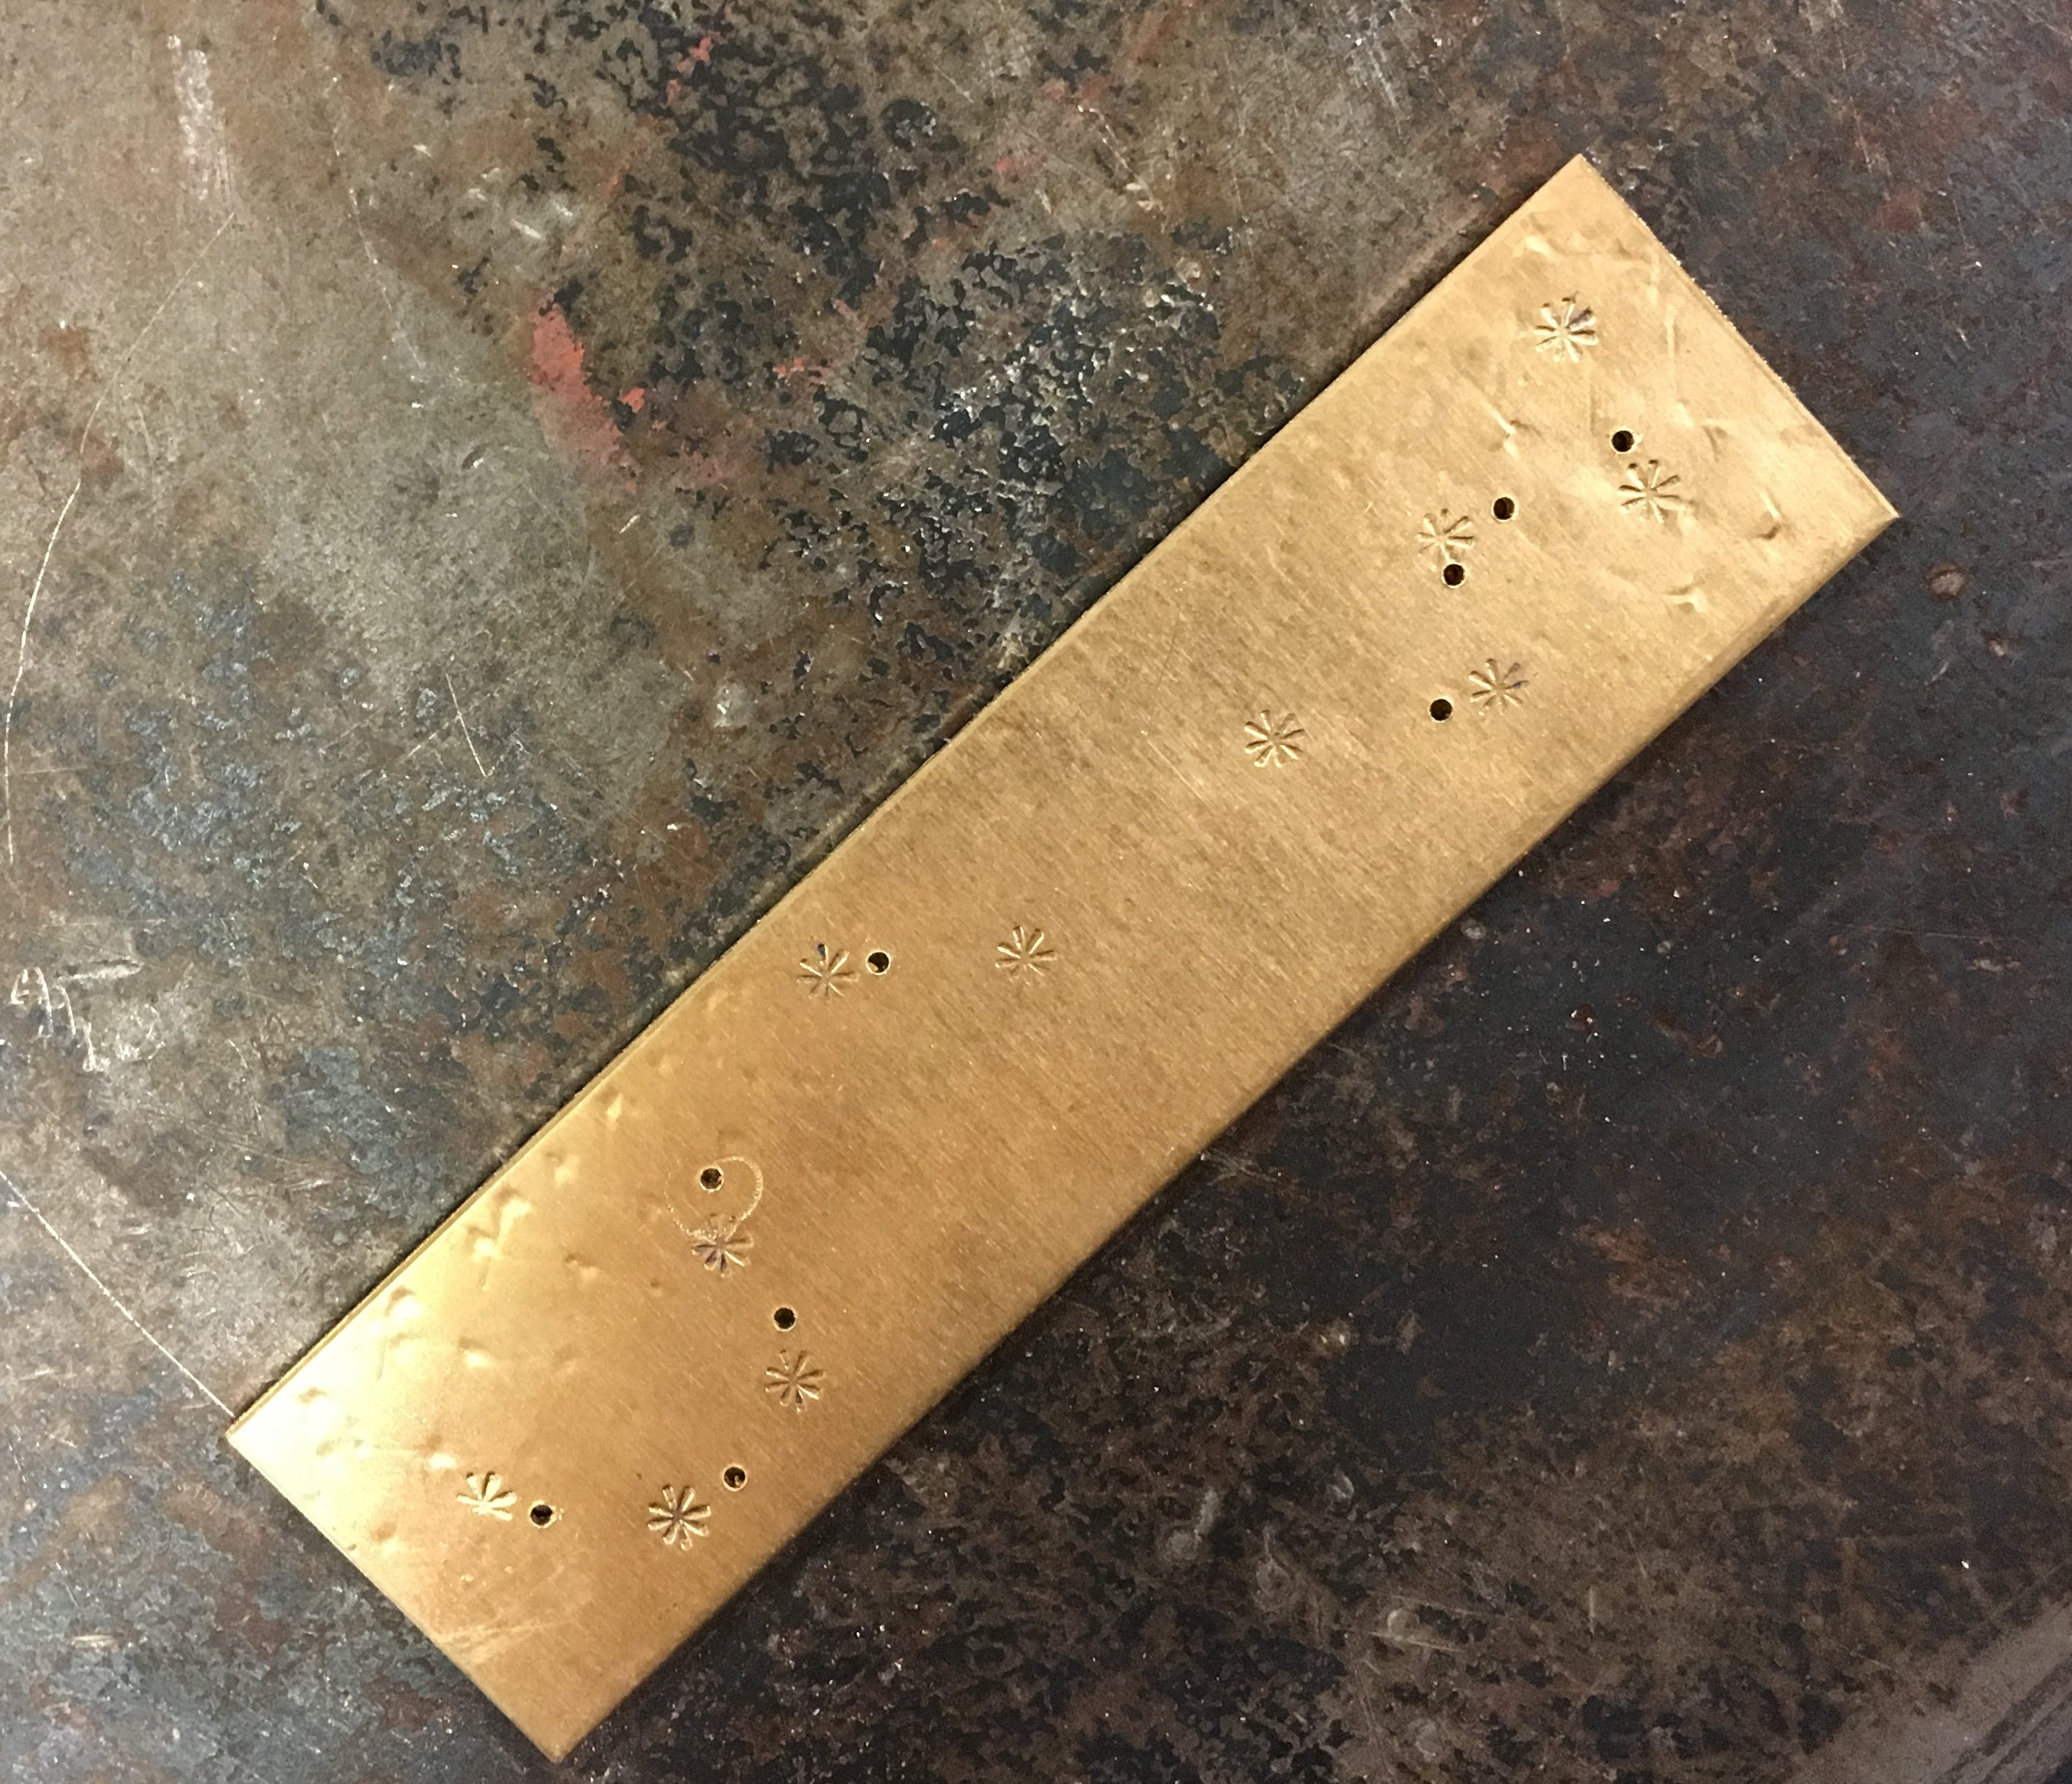 A flat rectangle of yellow, slightly shiny copper. At the top edge faint indentations can be seen; patterned along the middle are asterisks and small holes next to them.